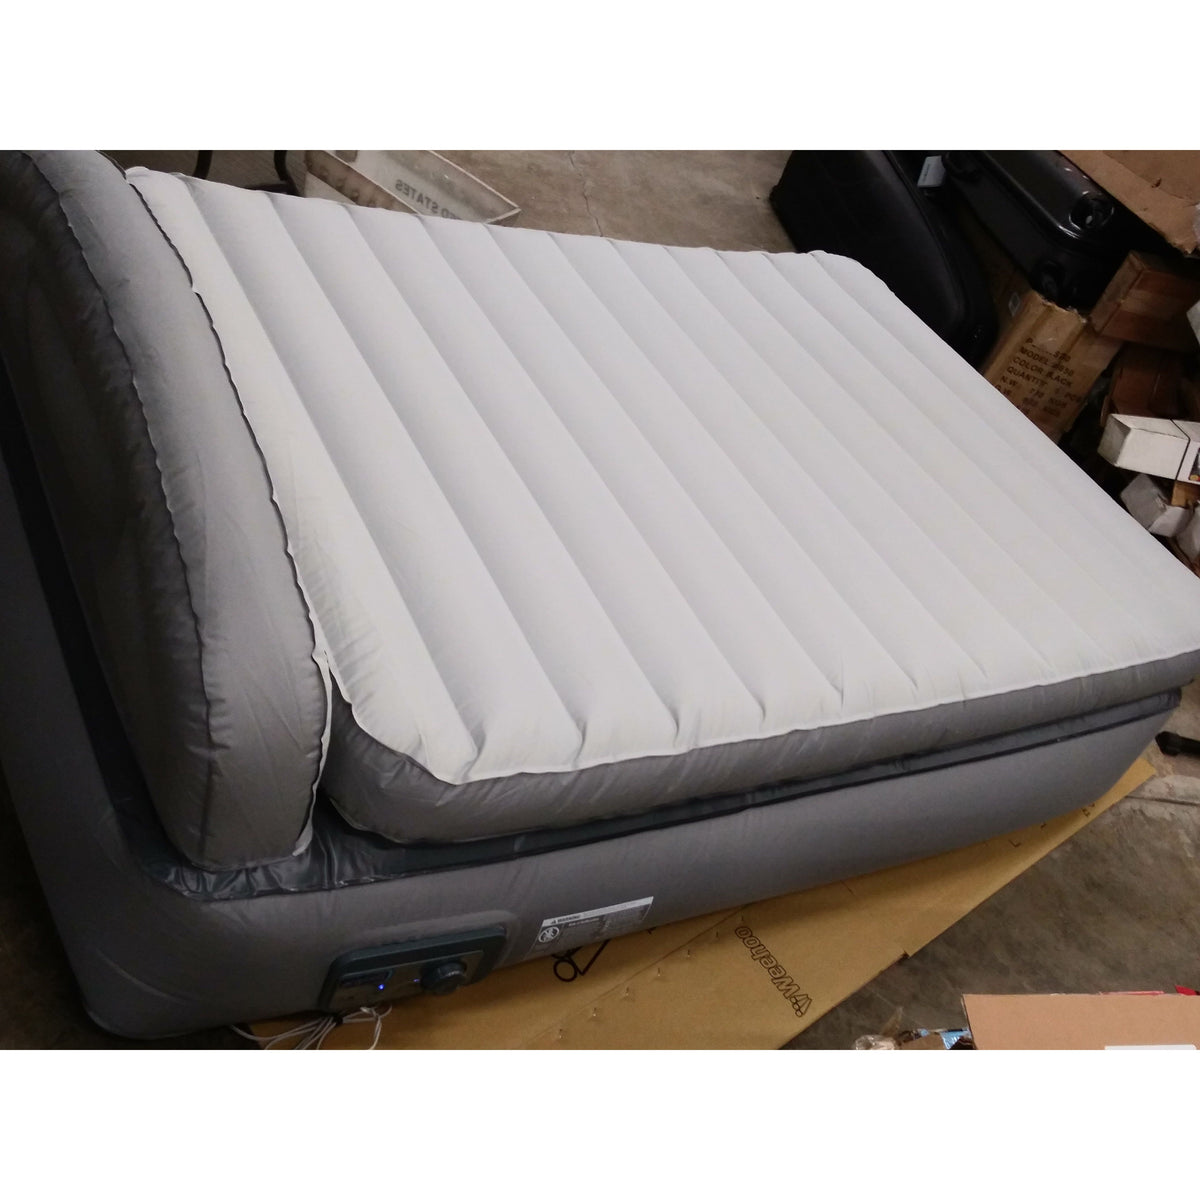 AeroBed Comfort Lock Laminated Air Mattress with Built-In Pump and Headboard - Full - Used - Acceptable